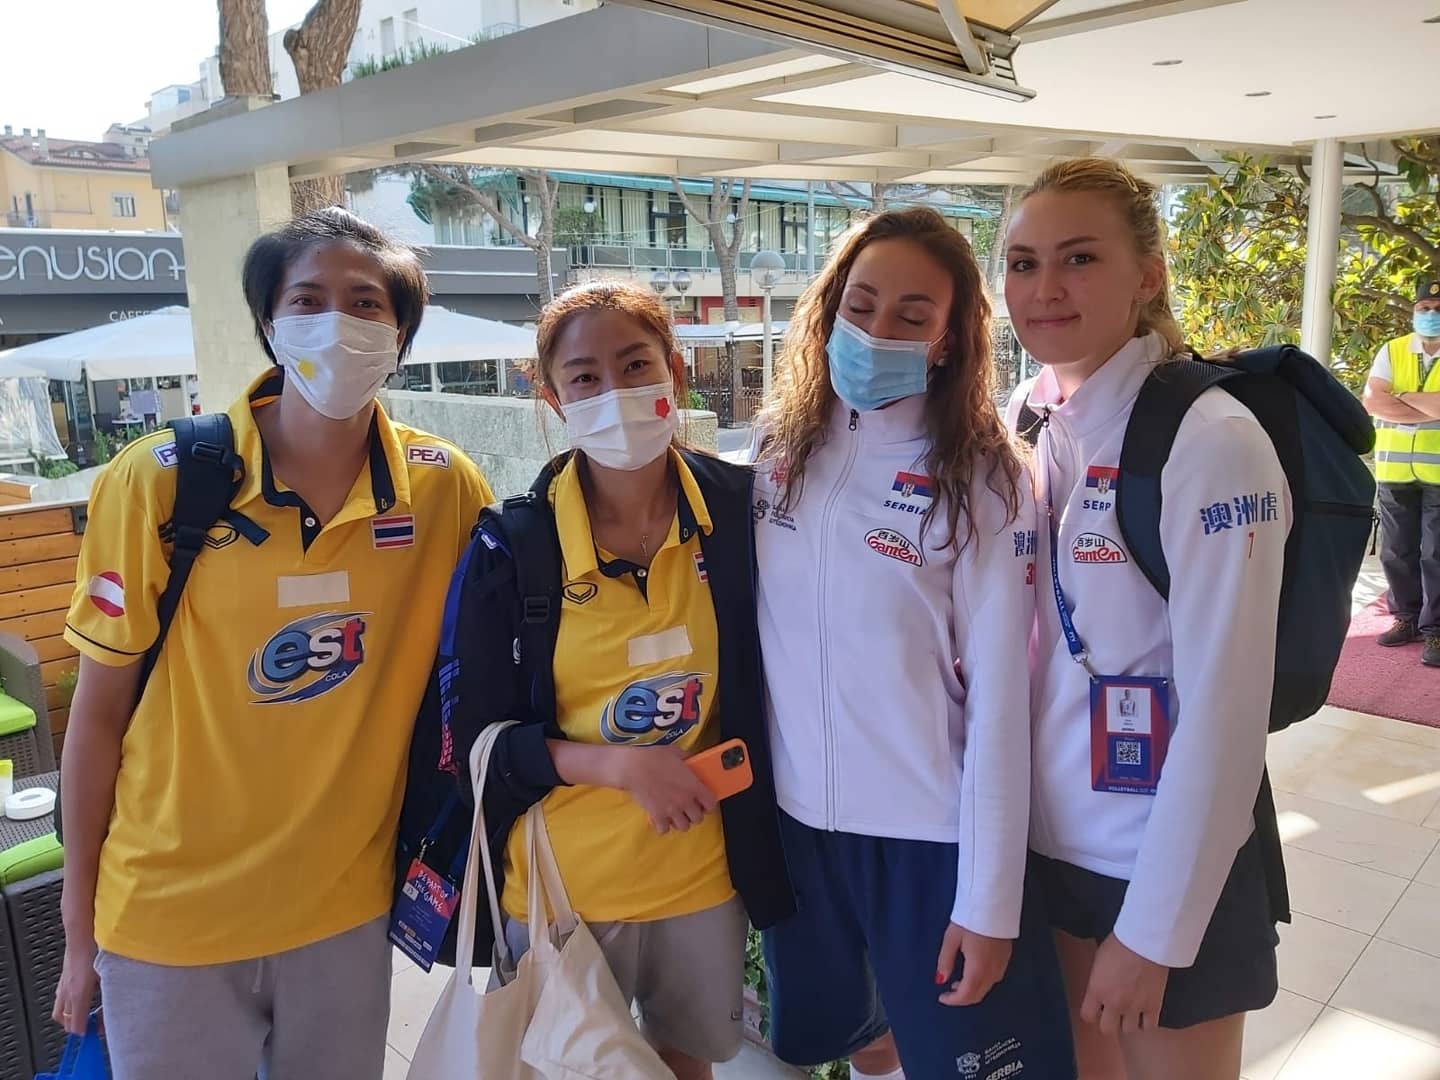 Serbian volleyball team members with Thai national team players